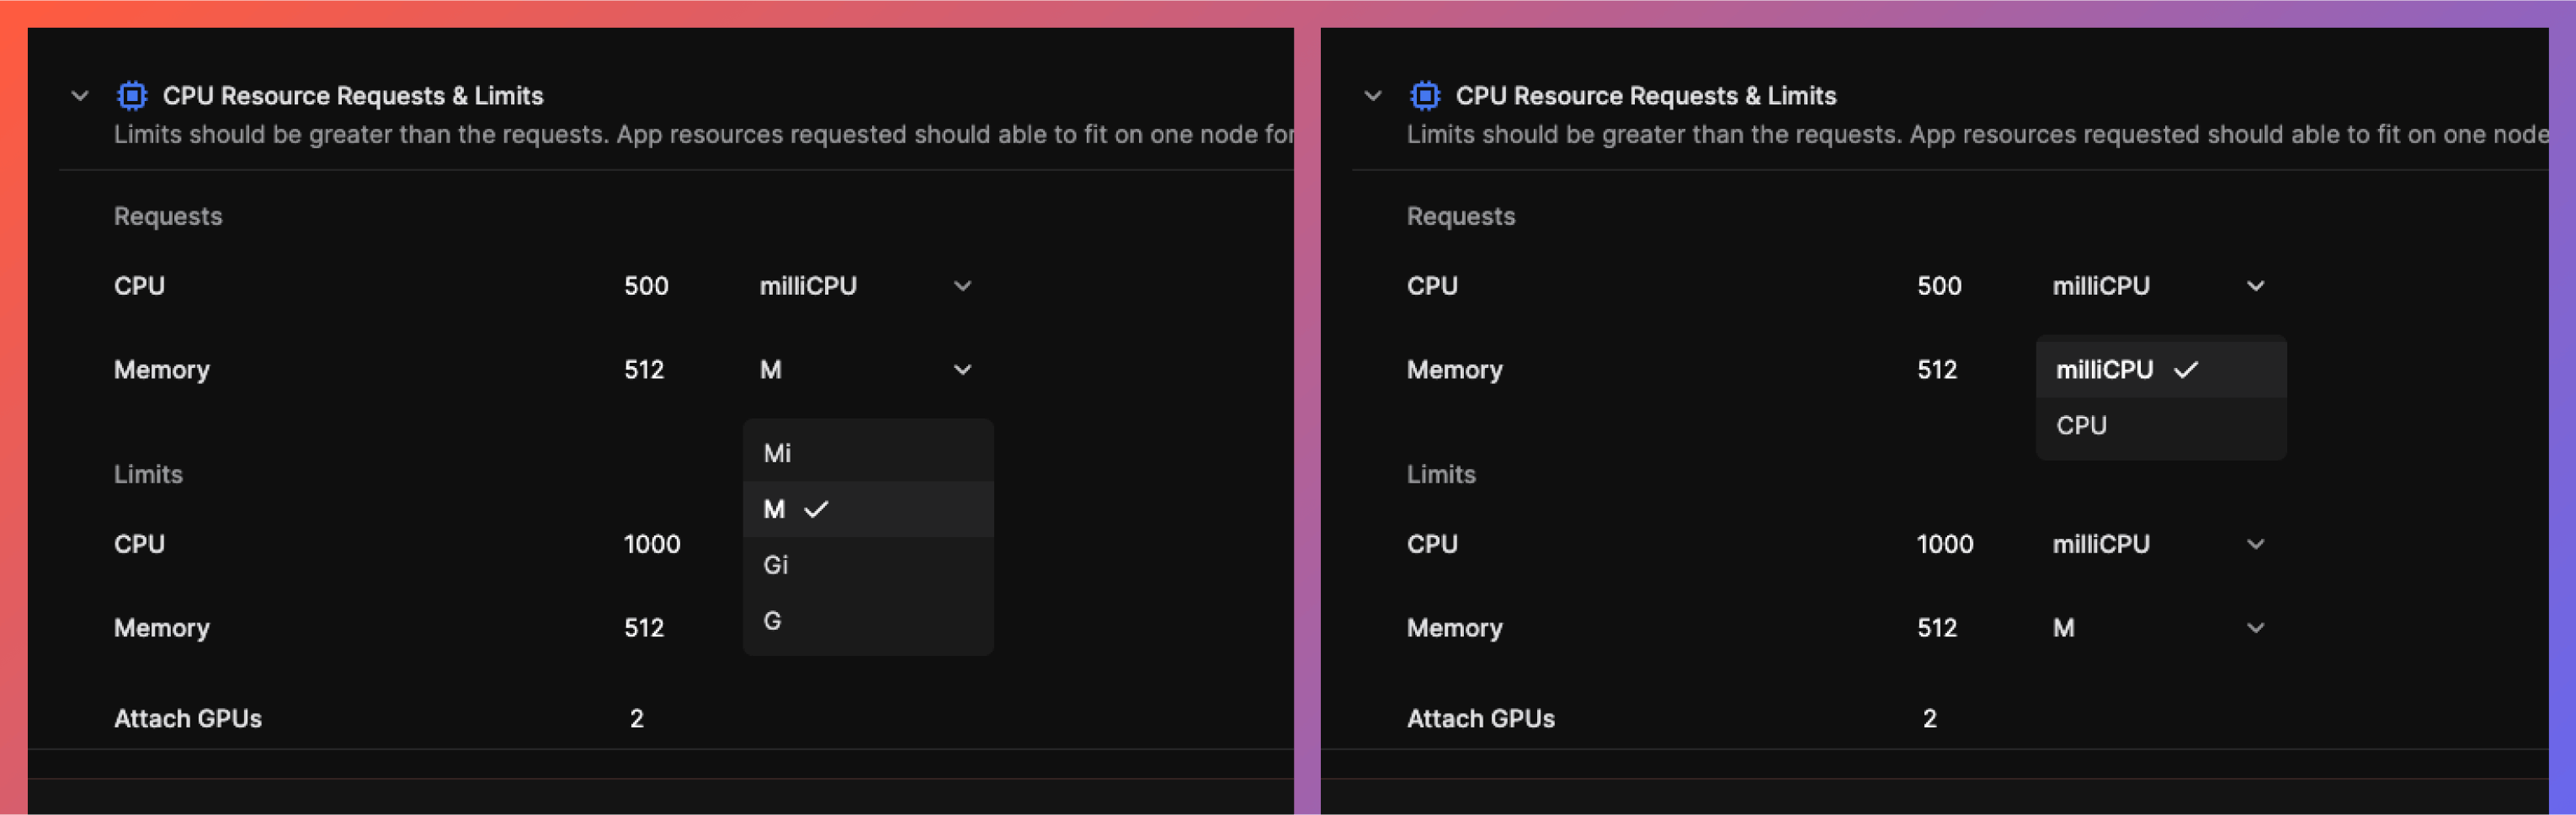 Set CPU resource requests and limits